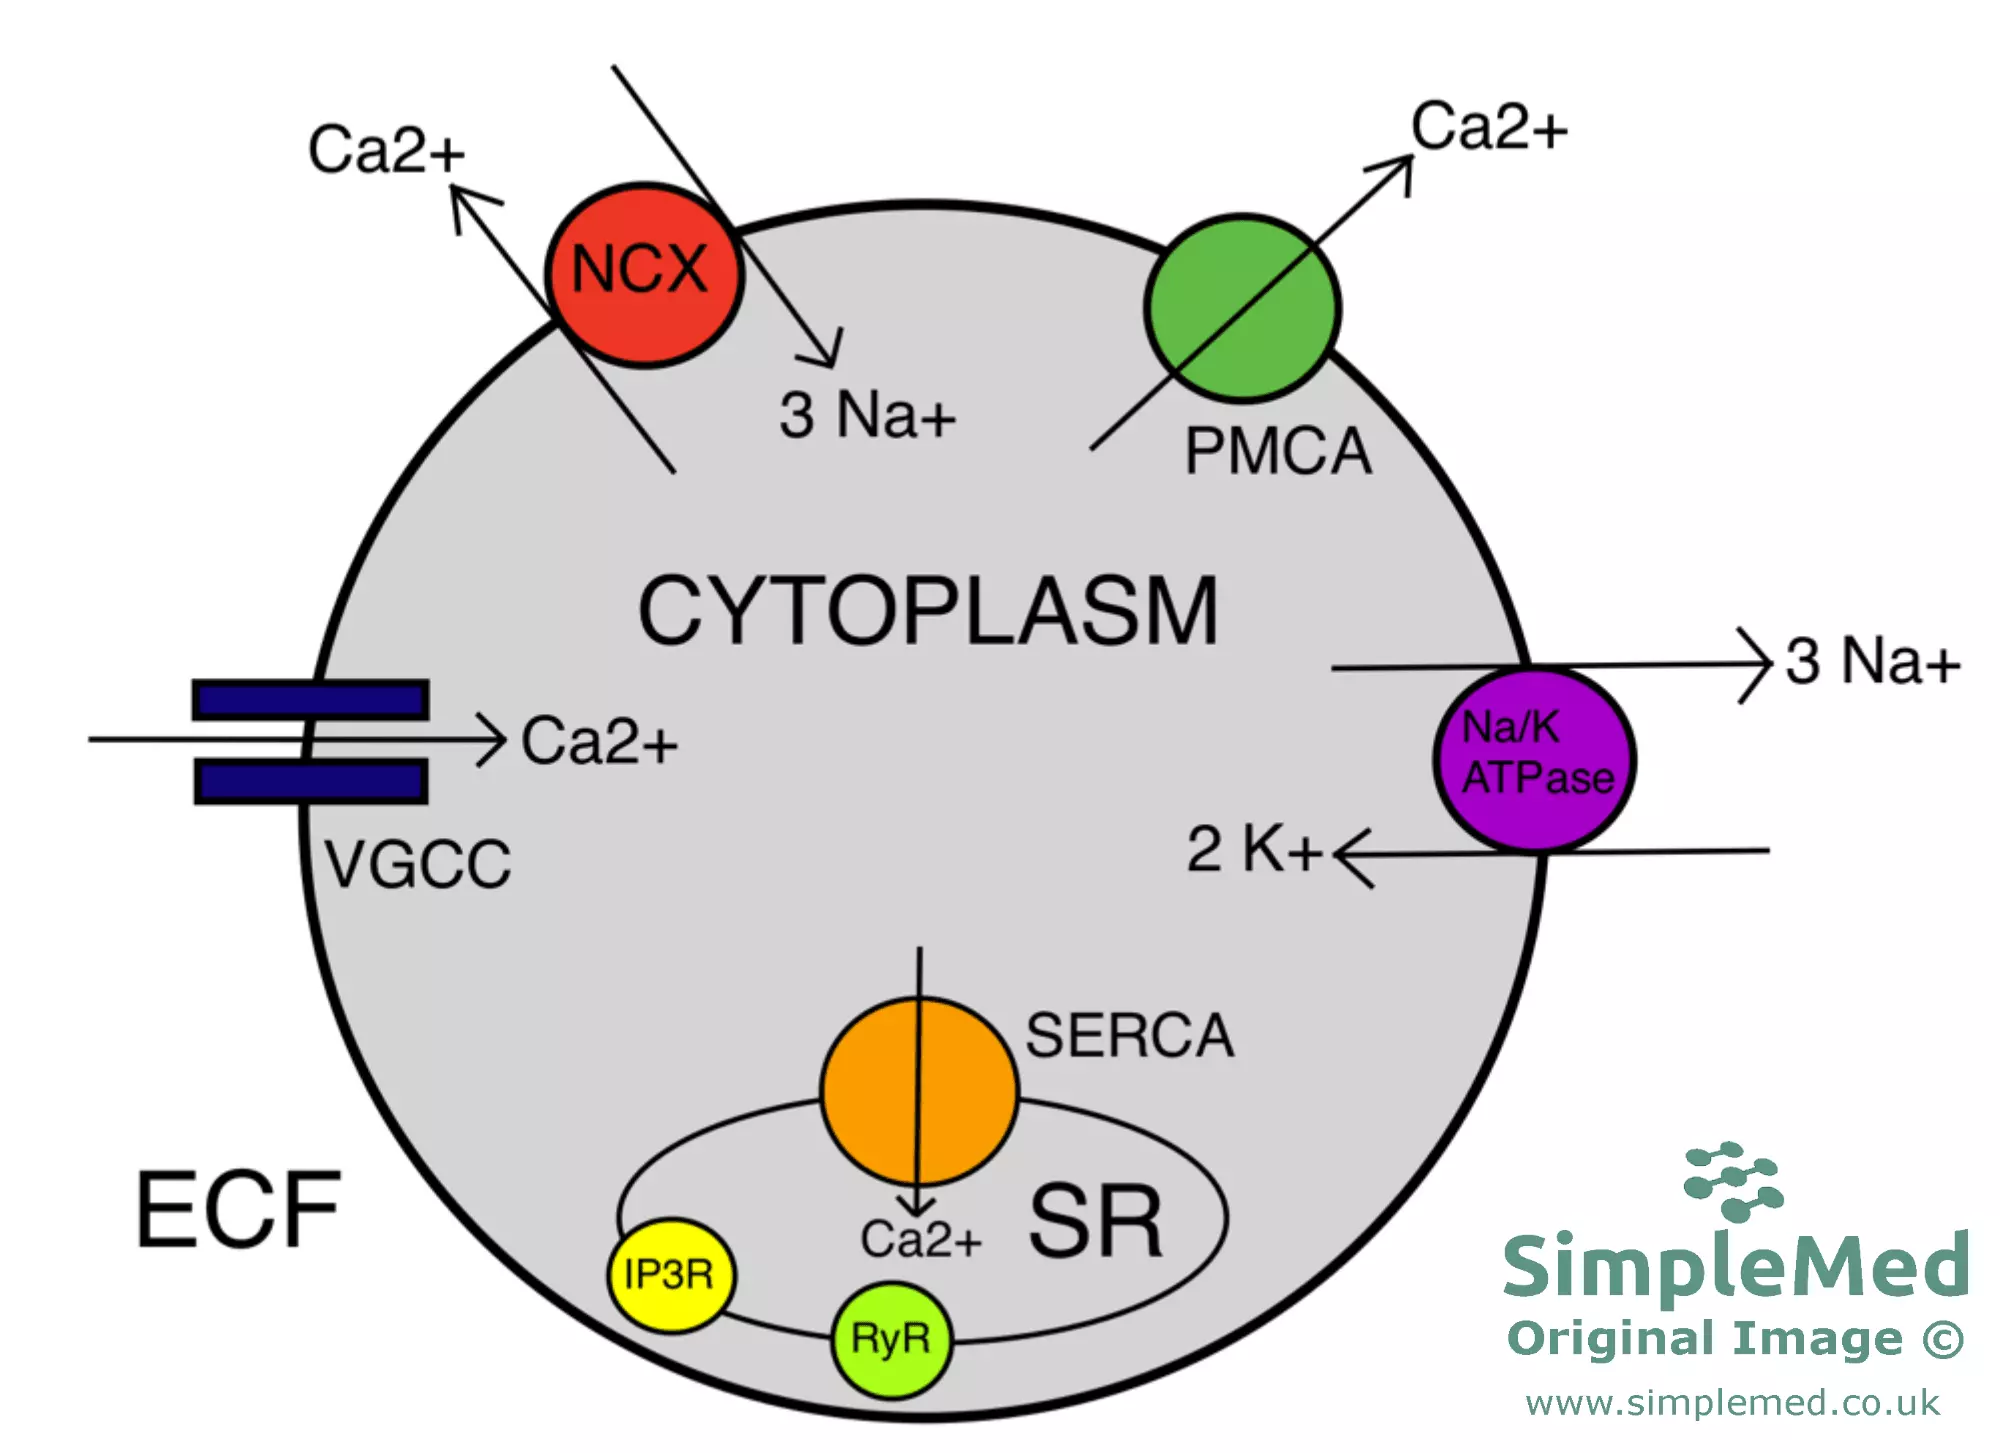 Summary of the Cellular Calcium Ion Regulation SimpleMed